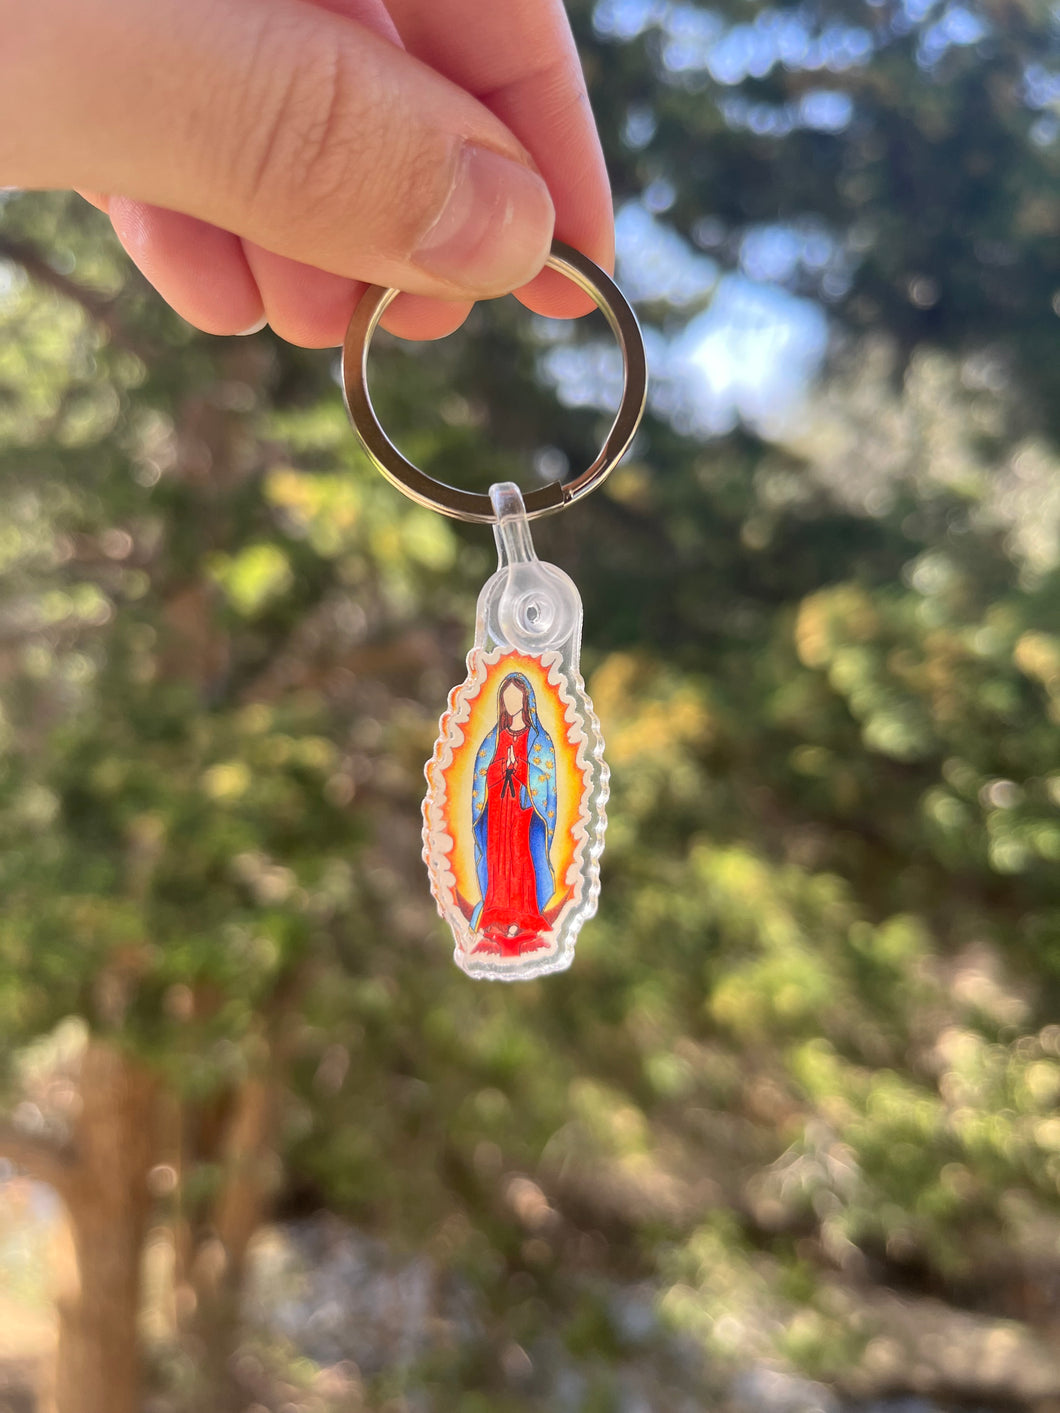 Our Lady of Guadalupe Keychain